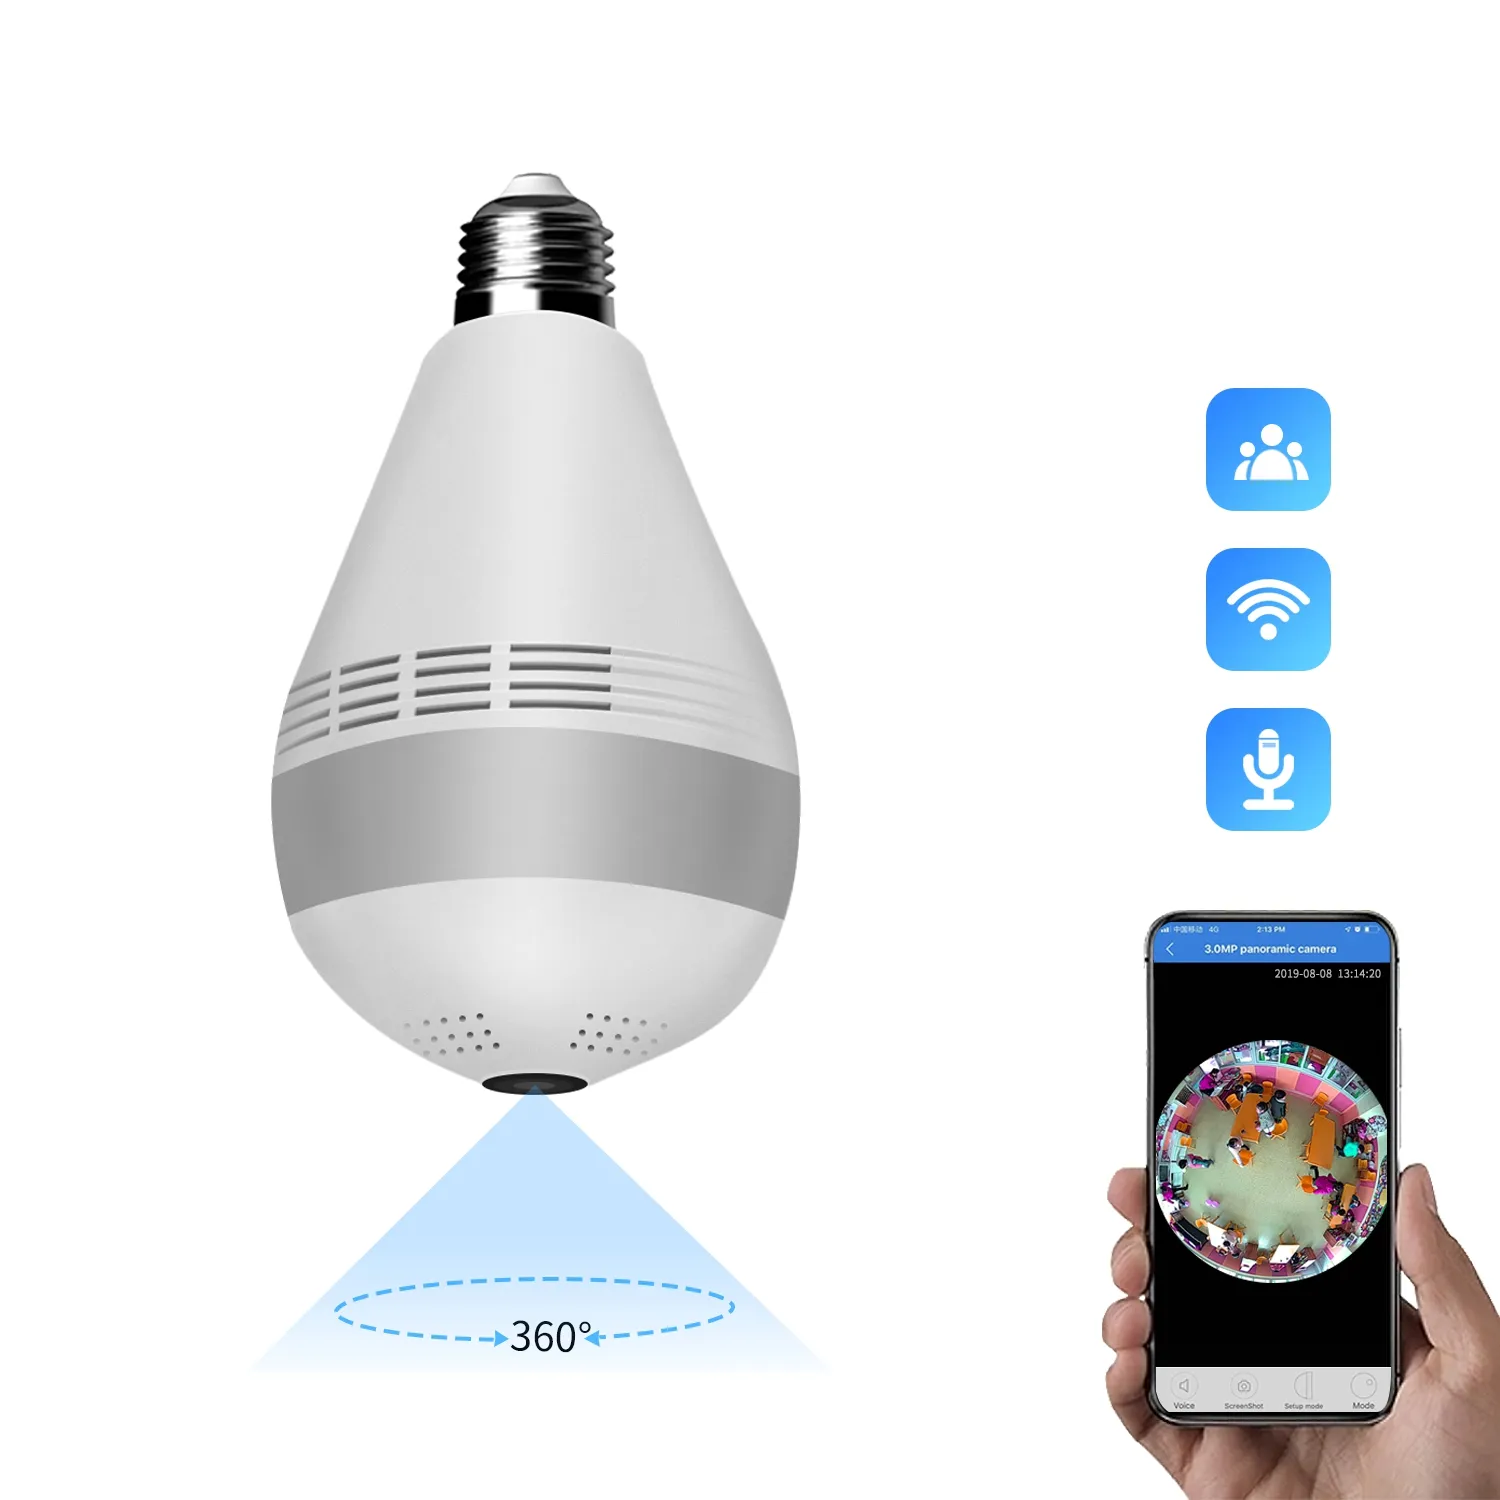 Clear View 3mp Hd Wifi Light Bulb Camera Security Panoramic Camera 360 Degrees Baby & Pet Monitors